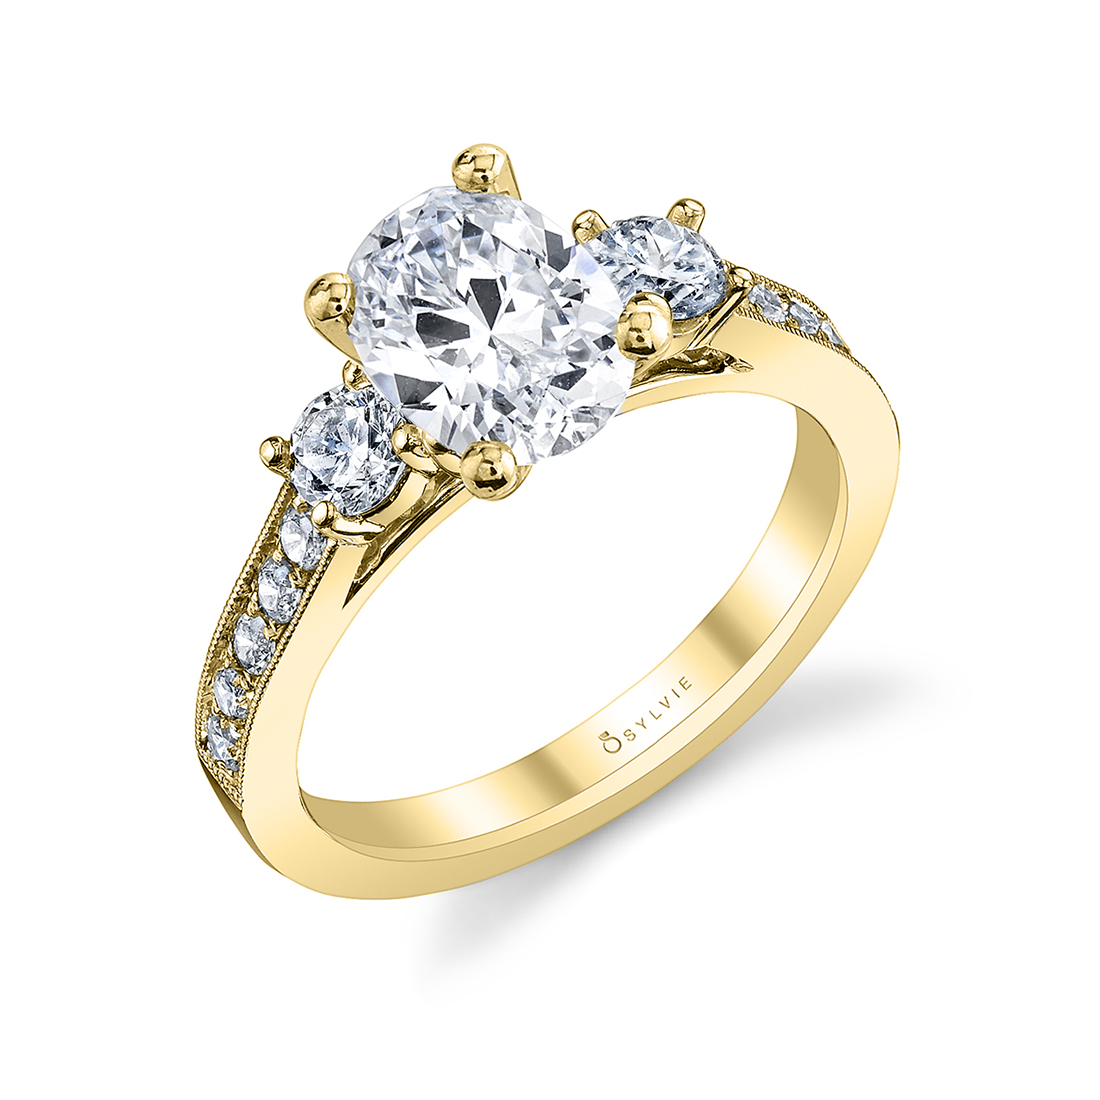 3 stone oval engagement ring in yellow gold